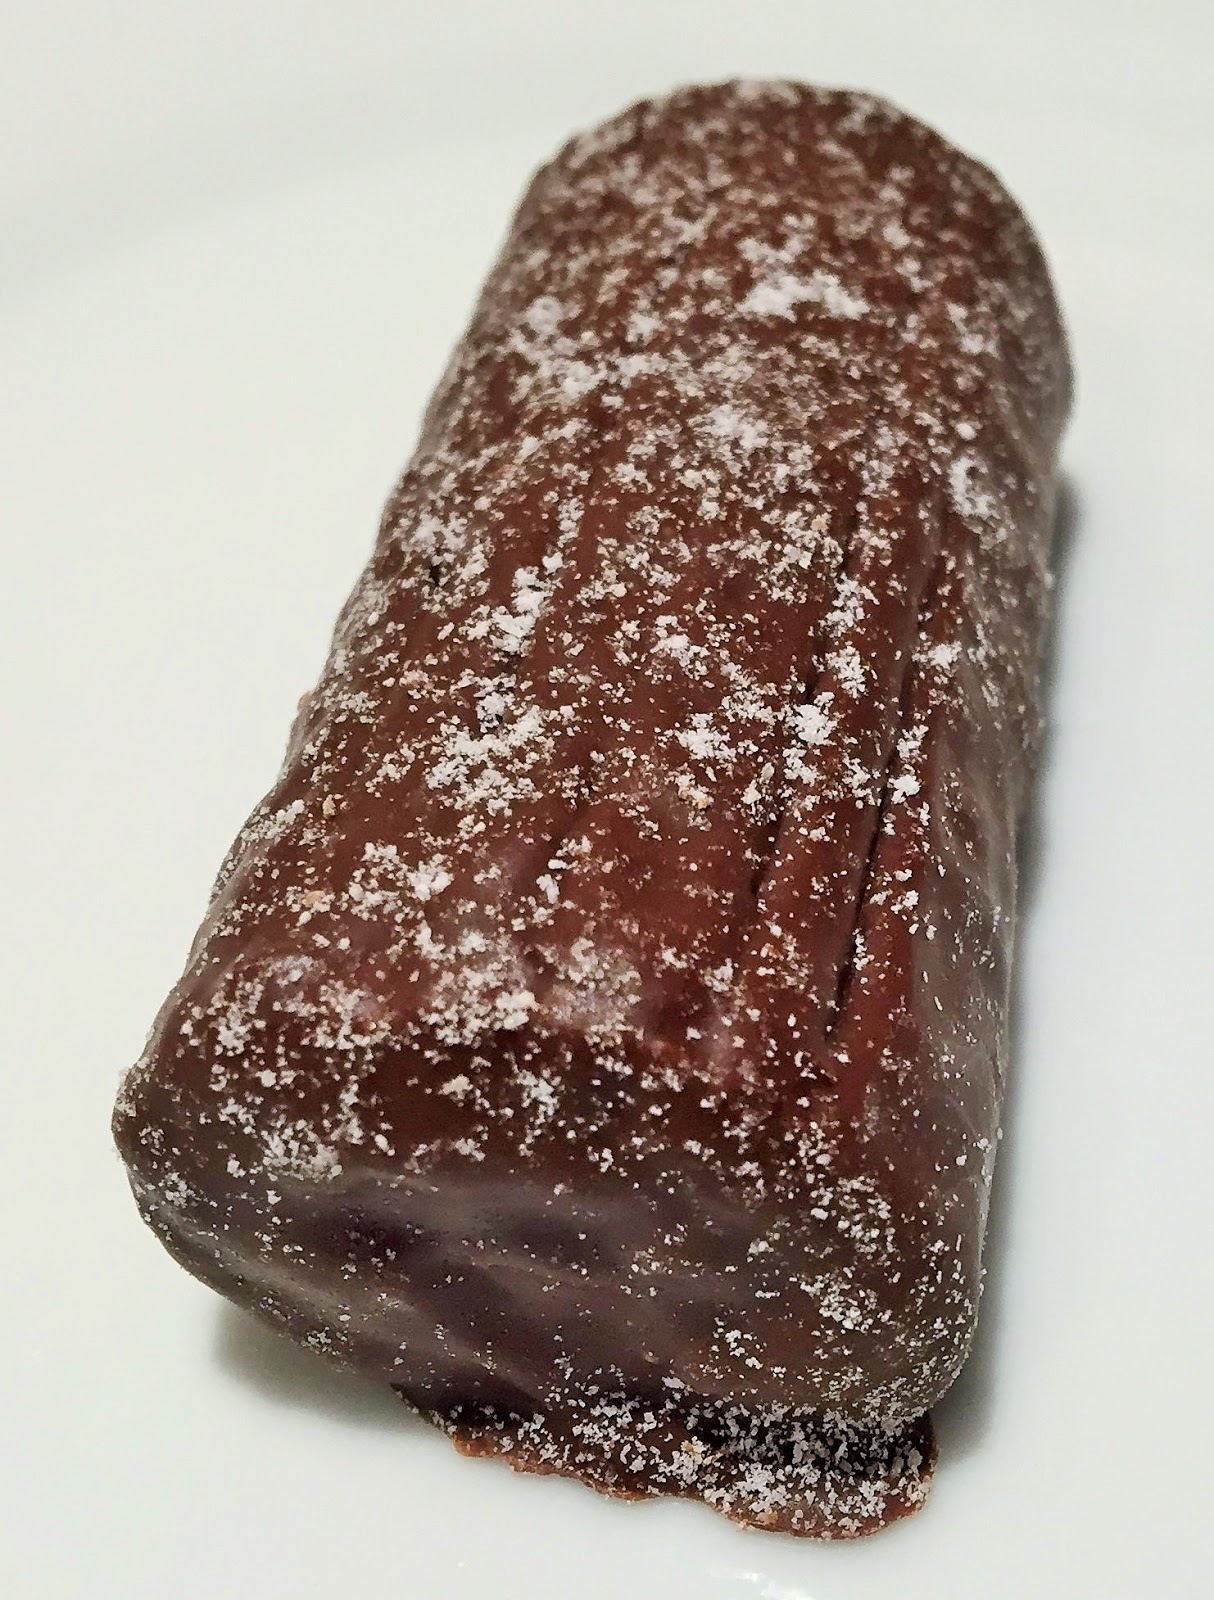 Archived Reviews From Amy Seeks New Treats: Cadbury's Yule Logs